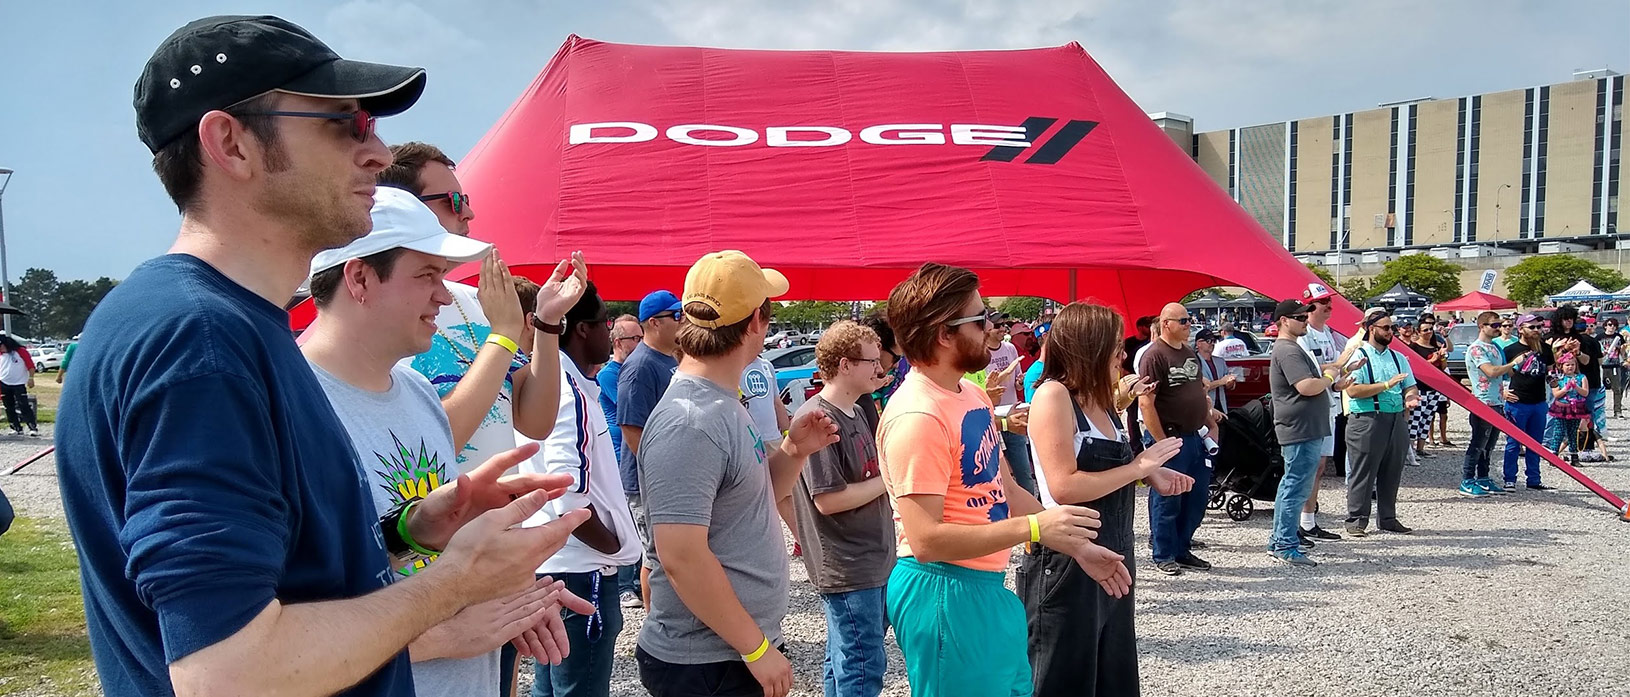 crowd at a dodge brand display